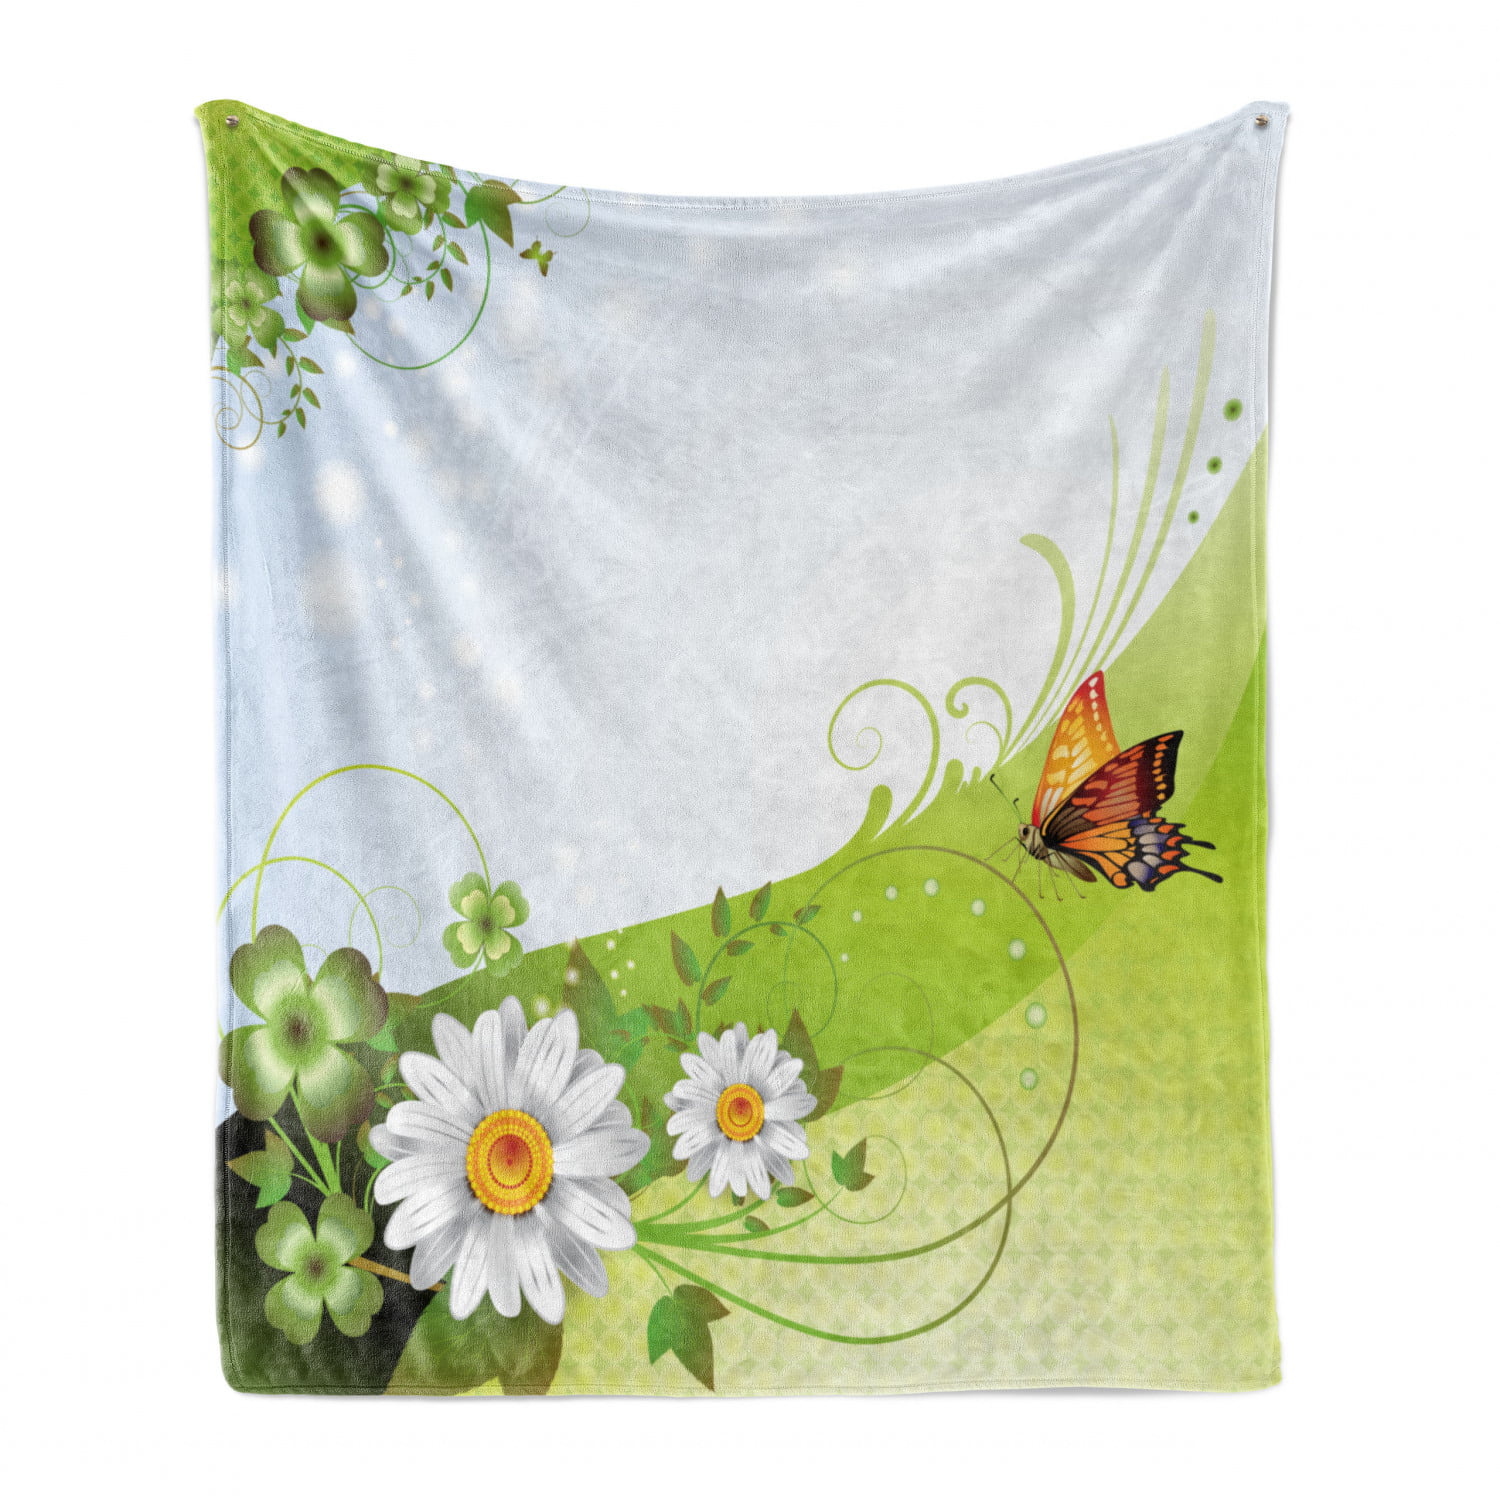 Monarch Butterfly Flannel Blanket,Soft Bedding Fleece Throw Couch Cover Decorative Blanket for Home Bed Sofa & Dorm 80x60 